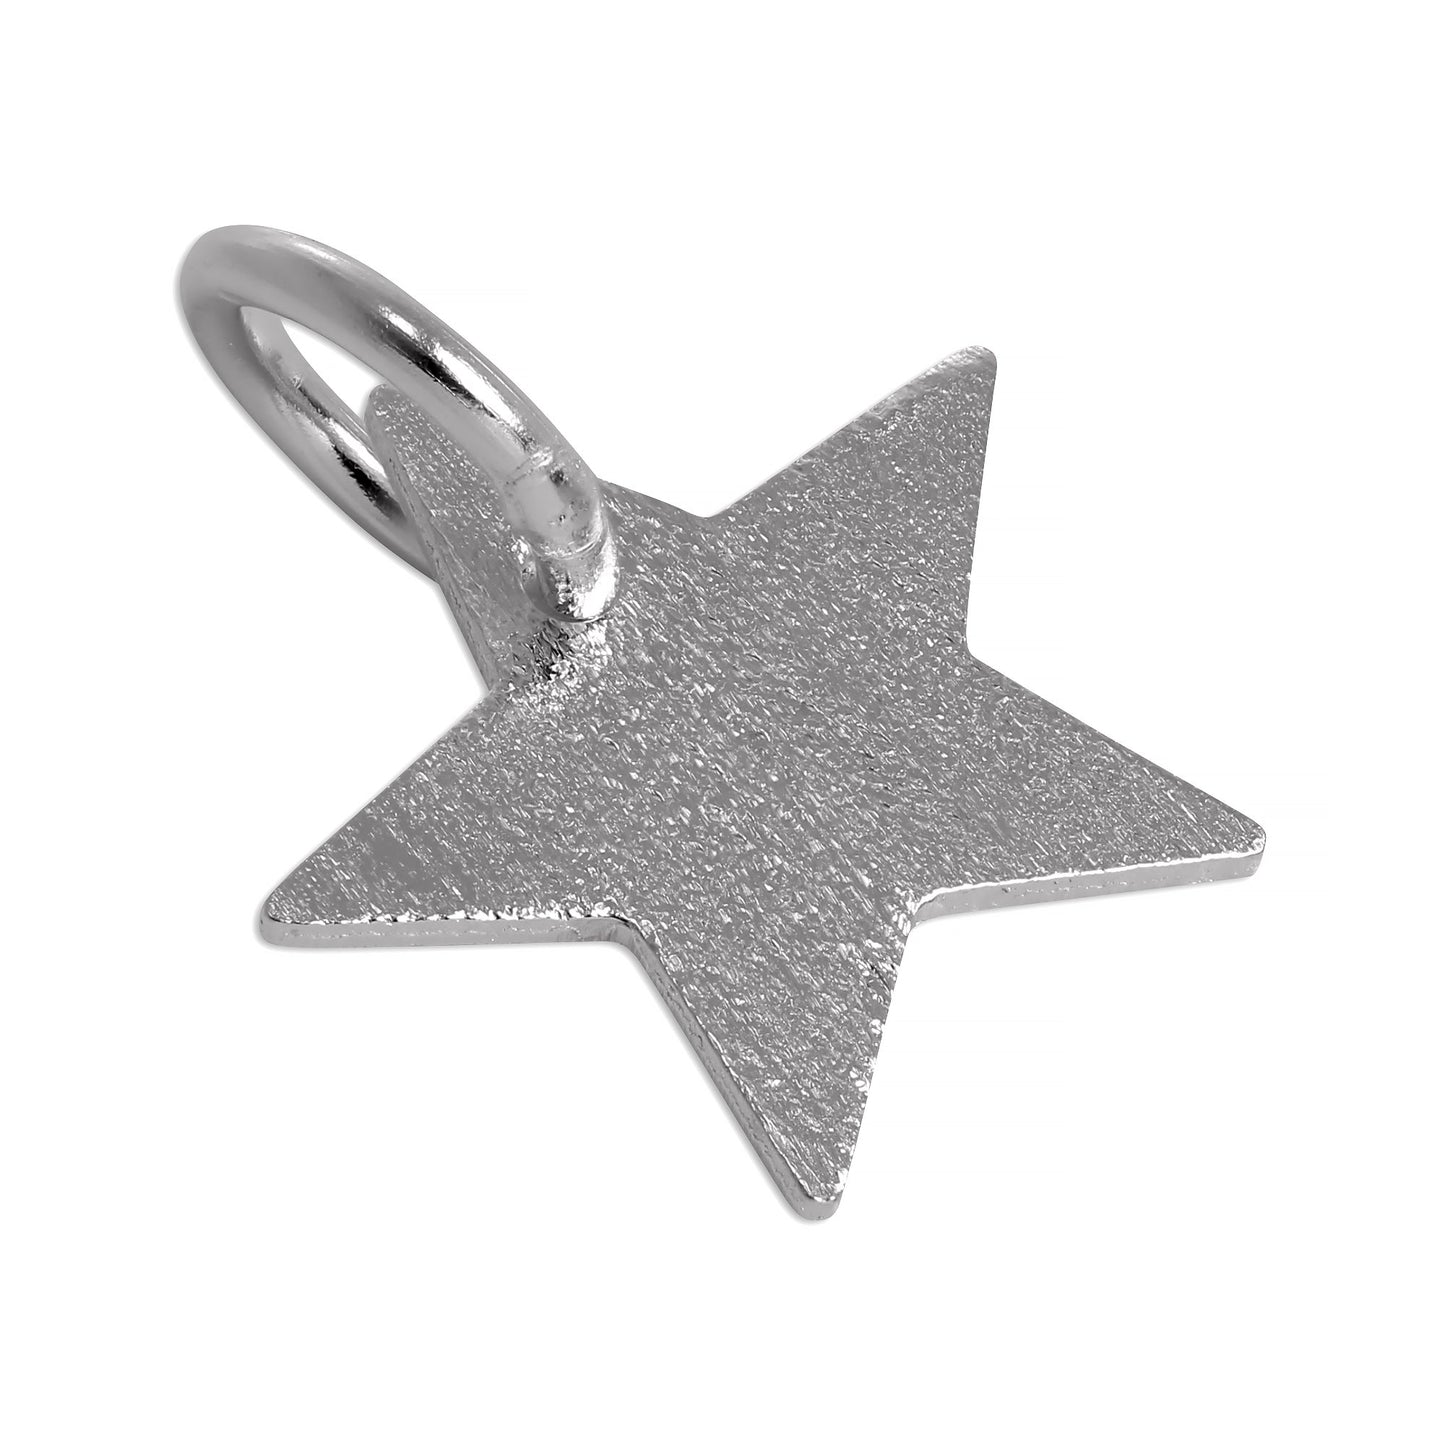 Brushed Sterling Silver Star Charm